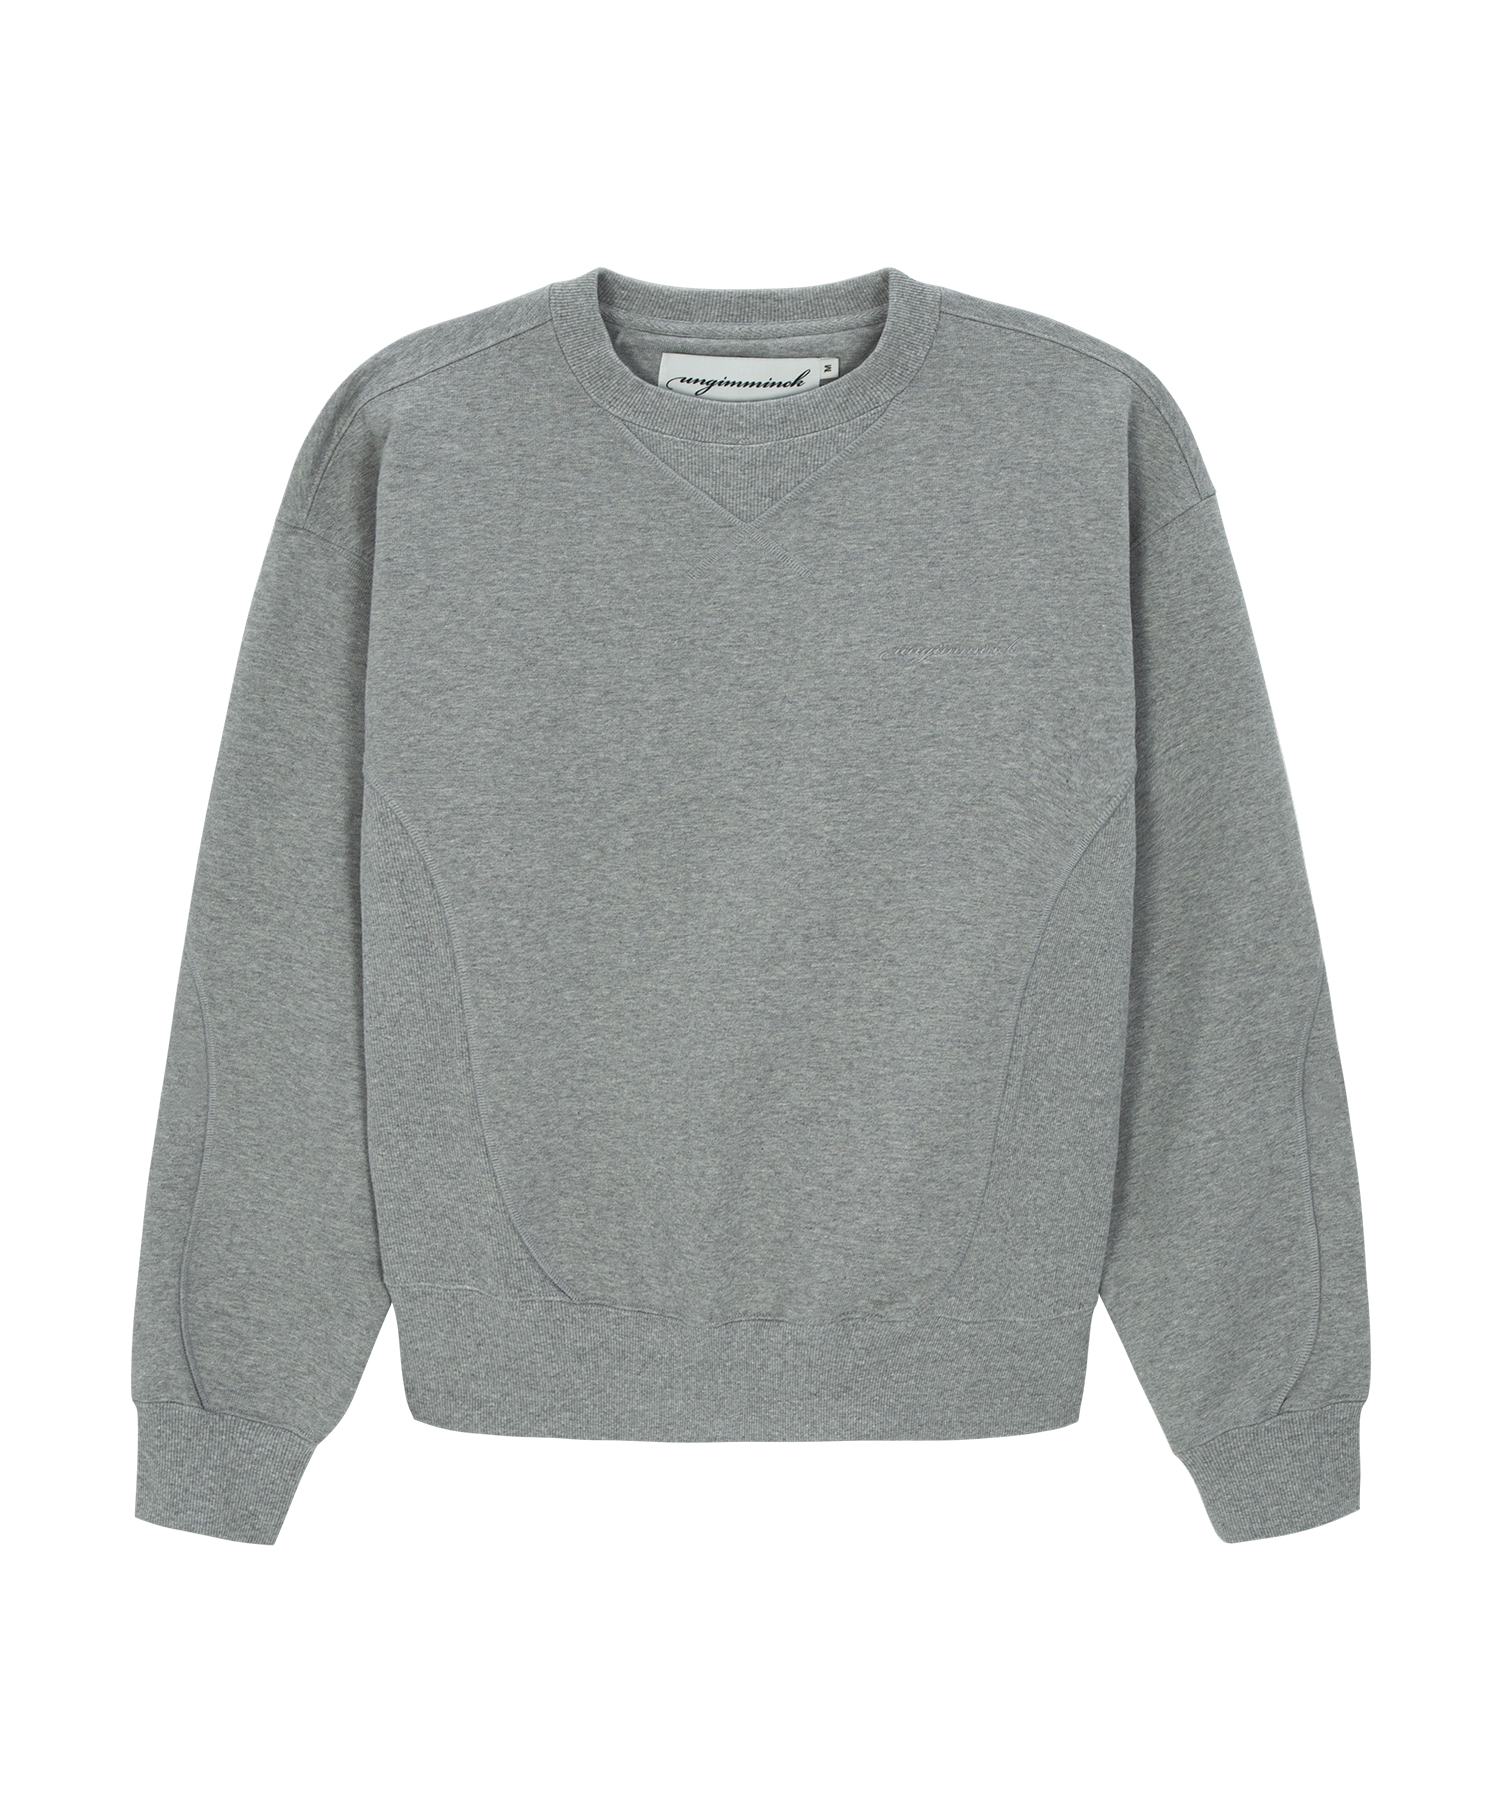 Curved Section Contras Sweatshirt -Grey